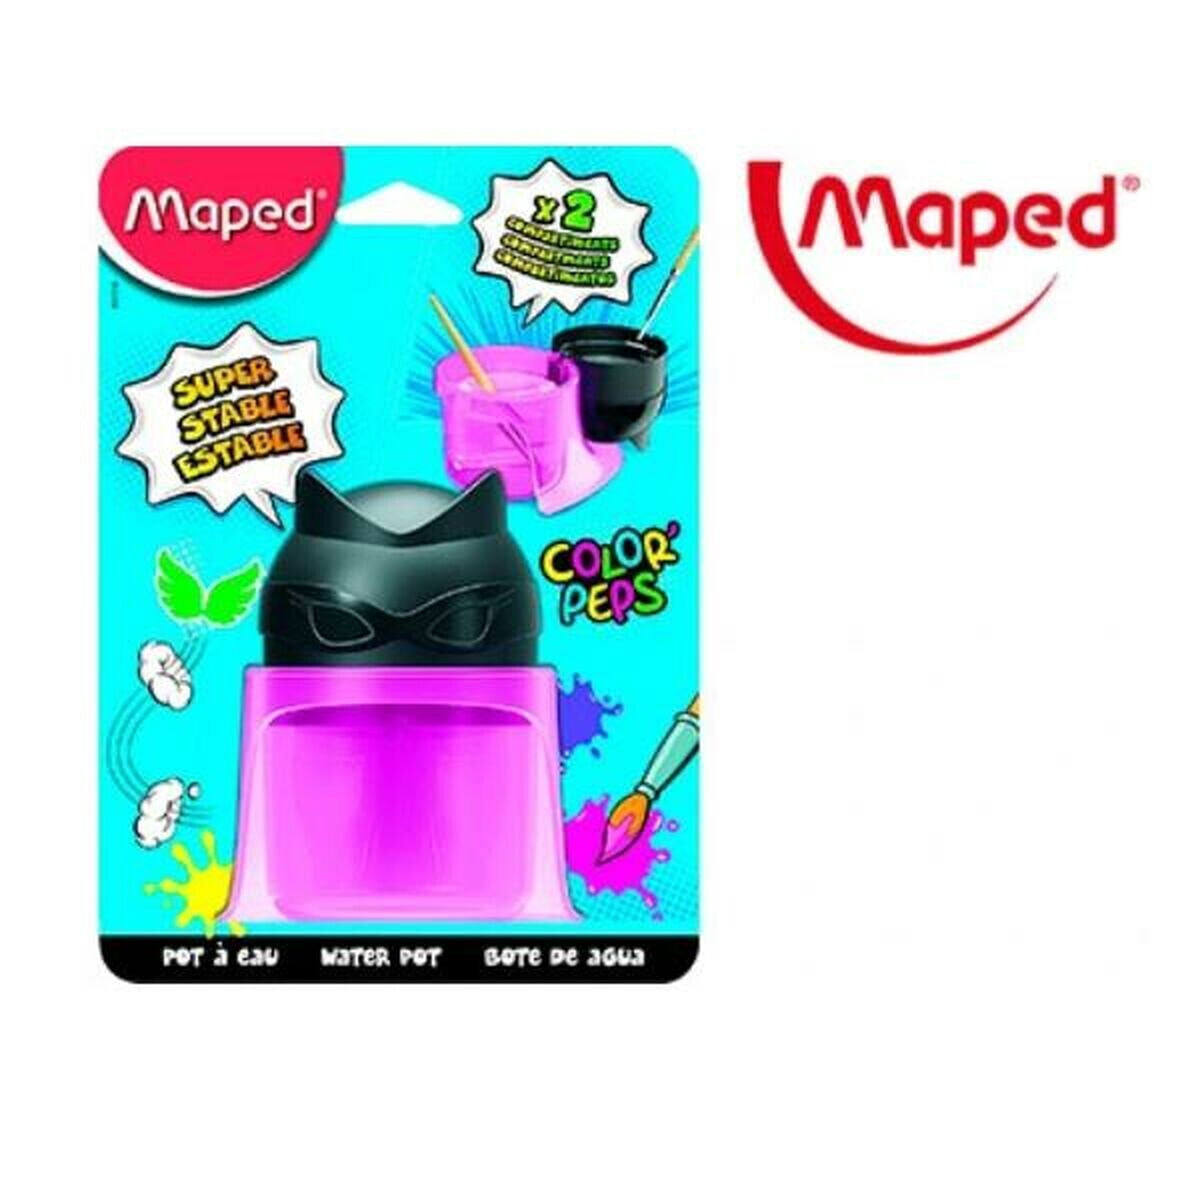 Clothes Dye Maped 811310